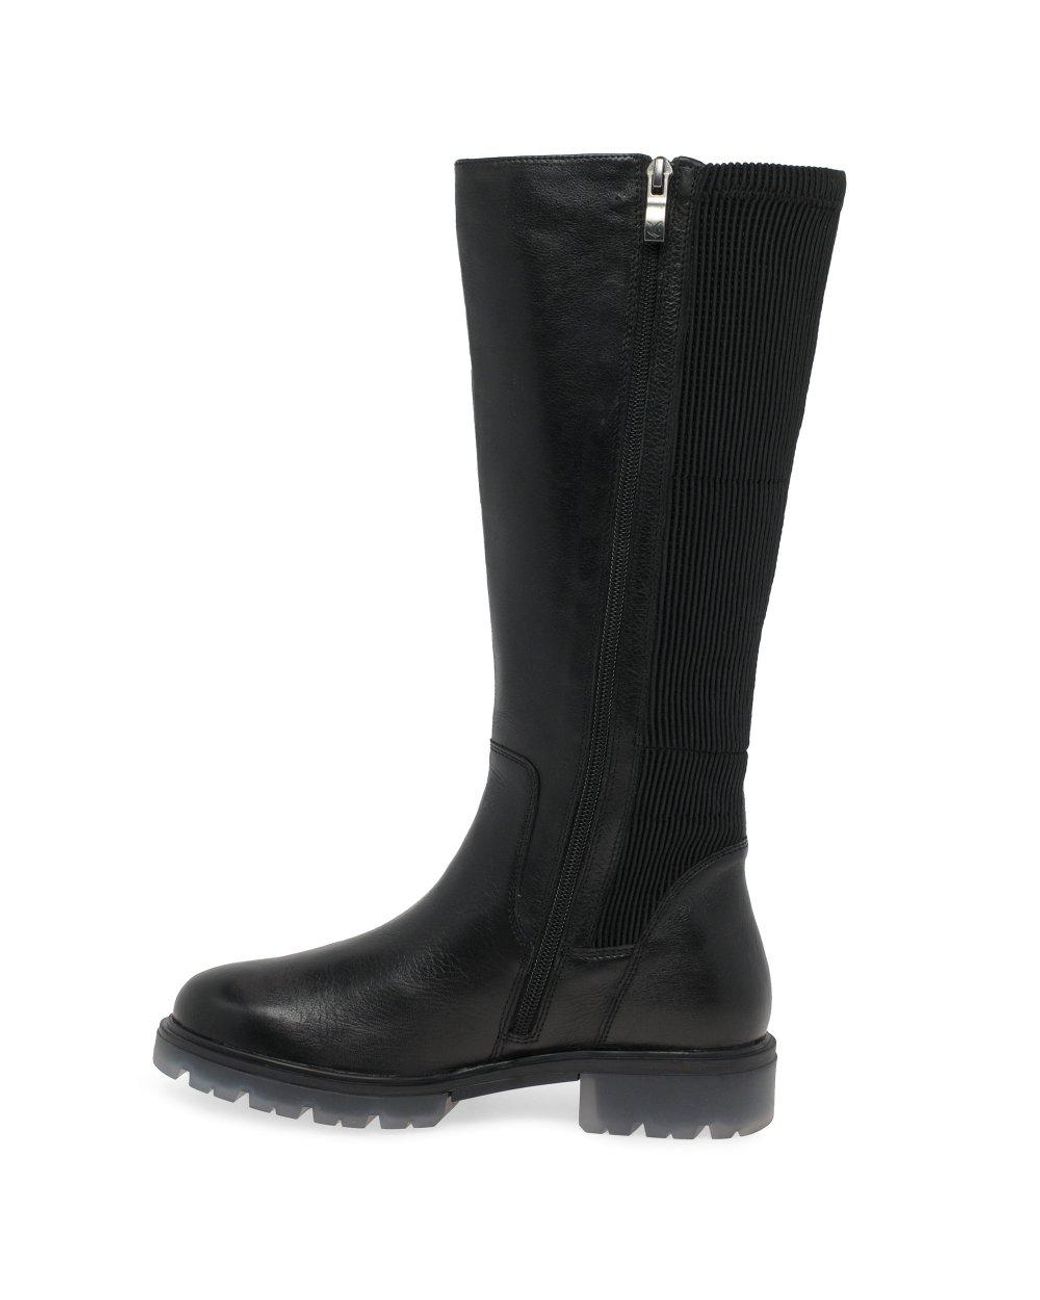 Caprice Lucca Long Boots in Black | Lyst Australia